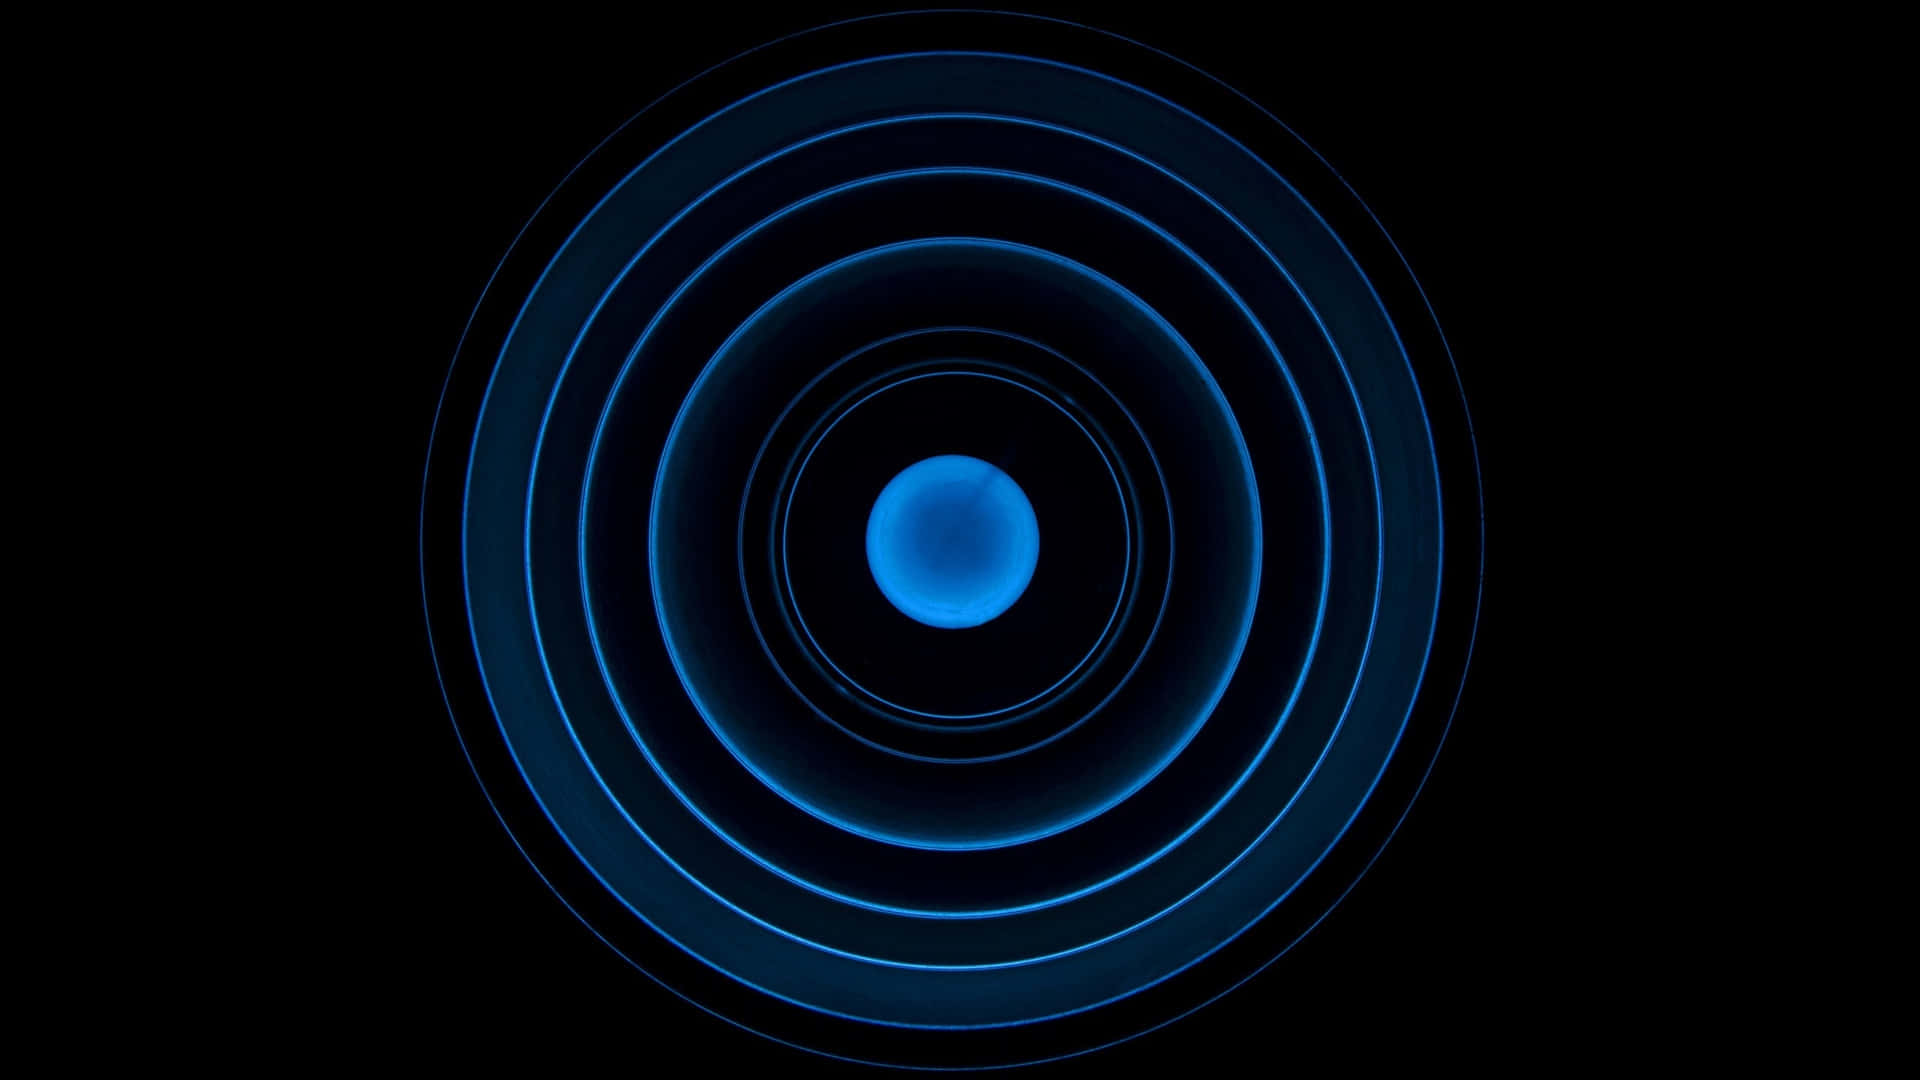 Abstract Blue Circleson Black Background Wallpaper